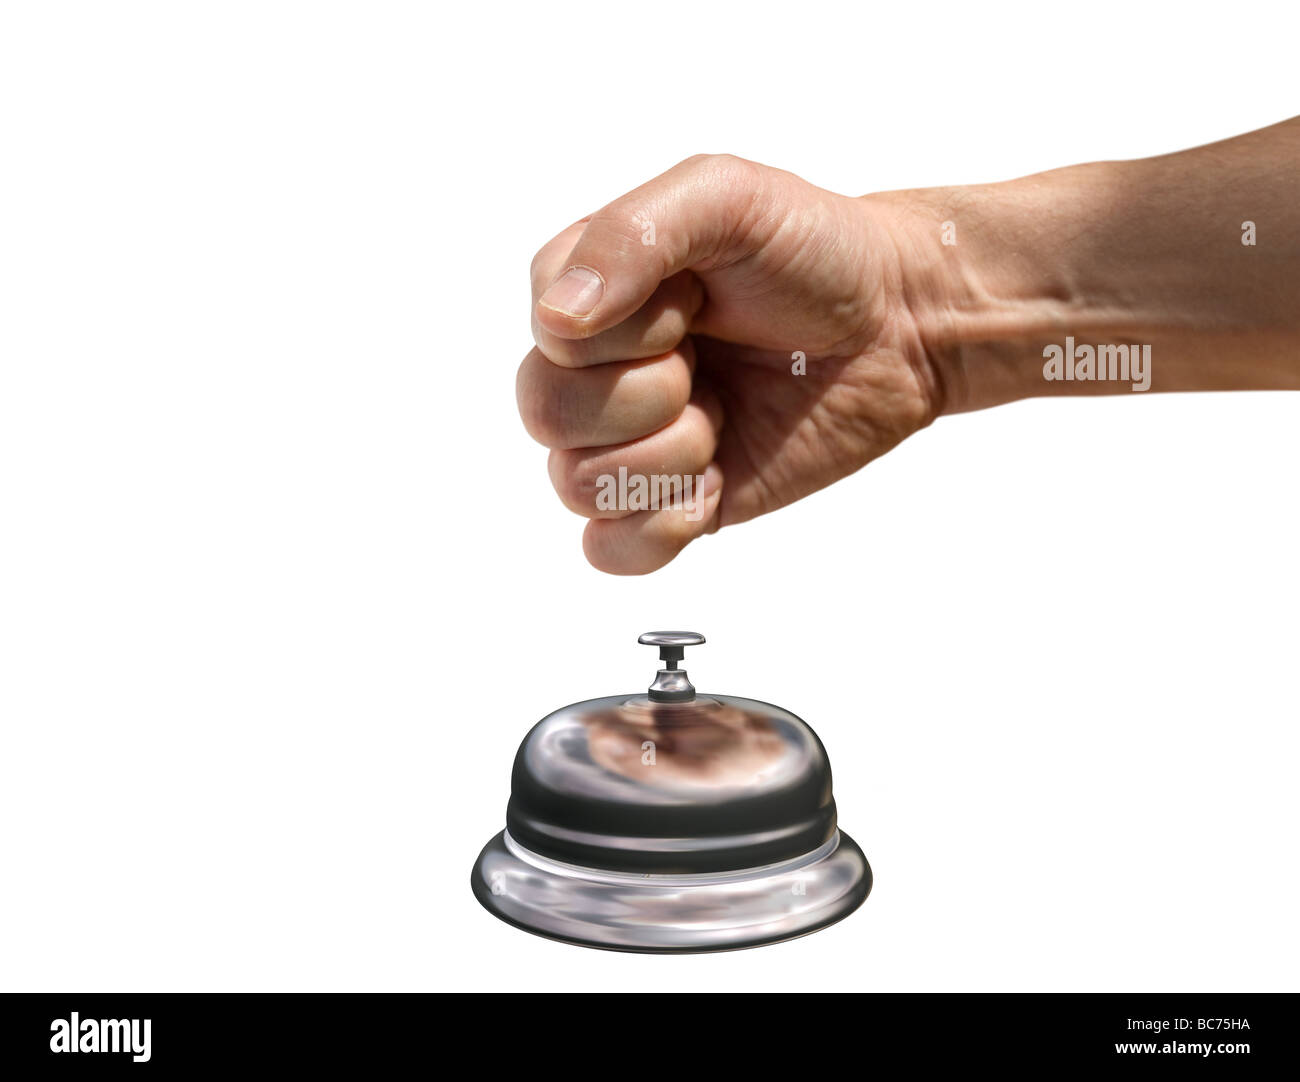 Isolated illustration of a fist banging a reception bell for attention Stock Photo